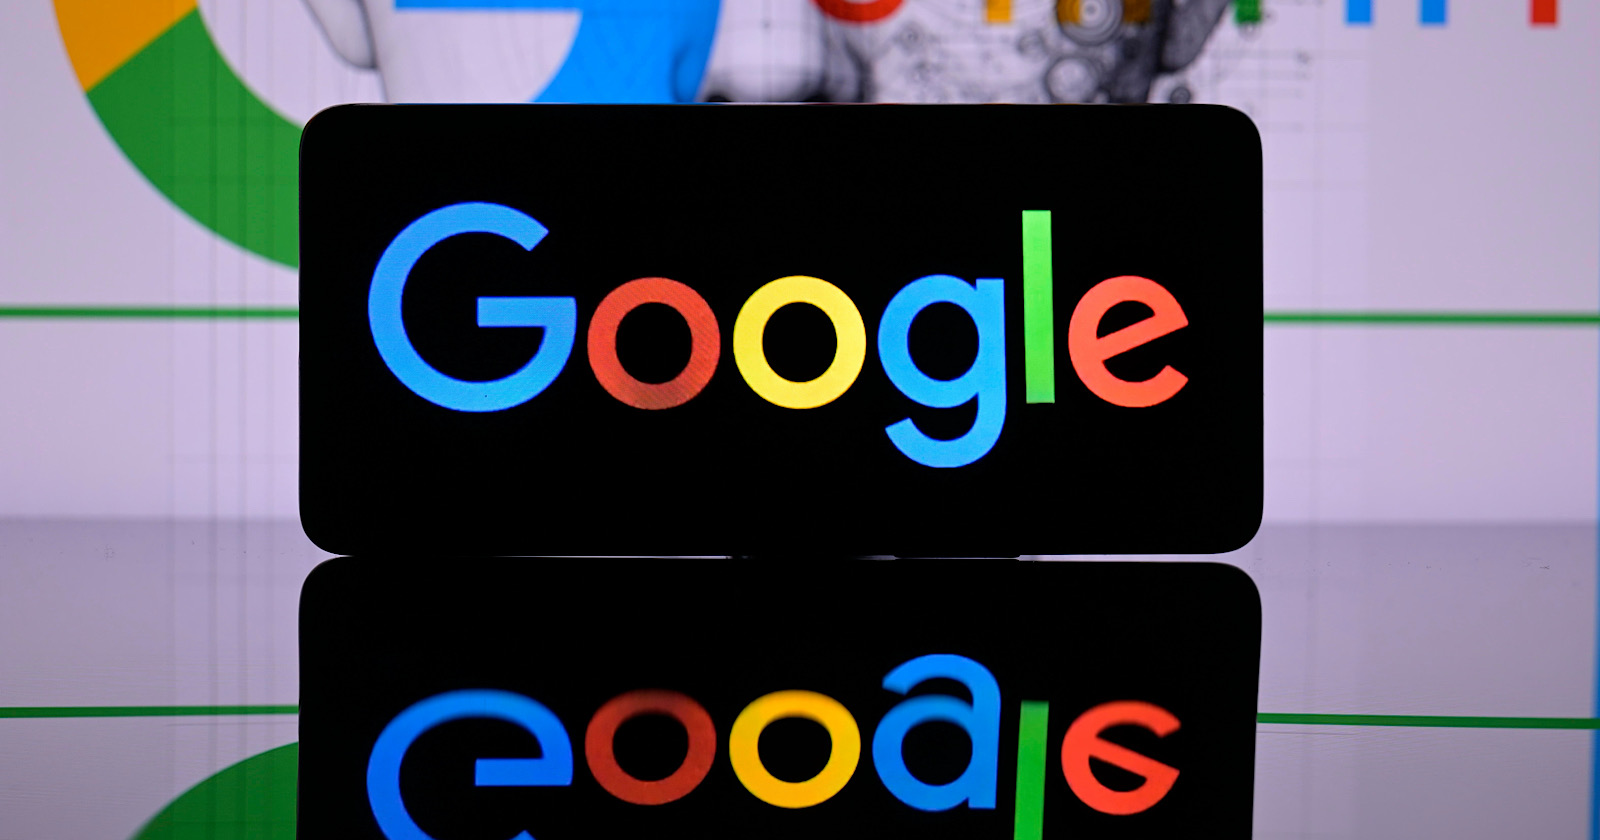 Google is being displayed on a smart phone with Google Gemini seen in the background, seen in this photo illustration.